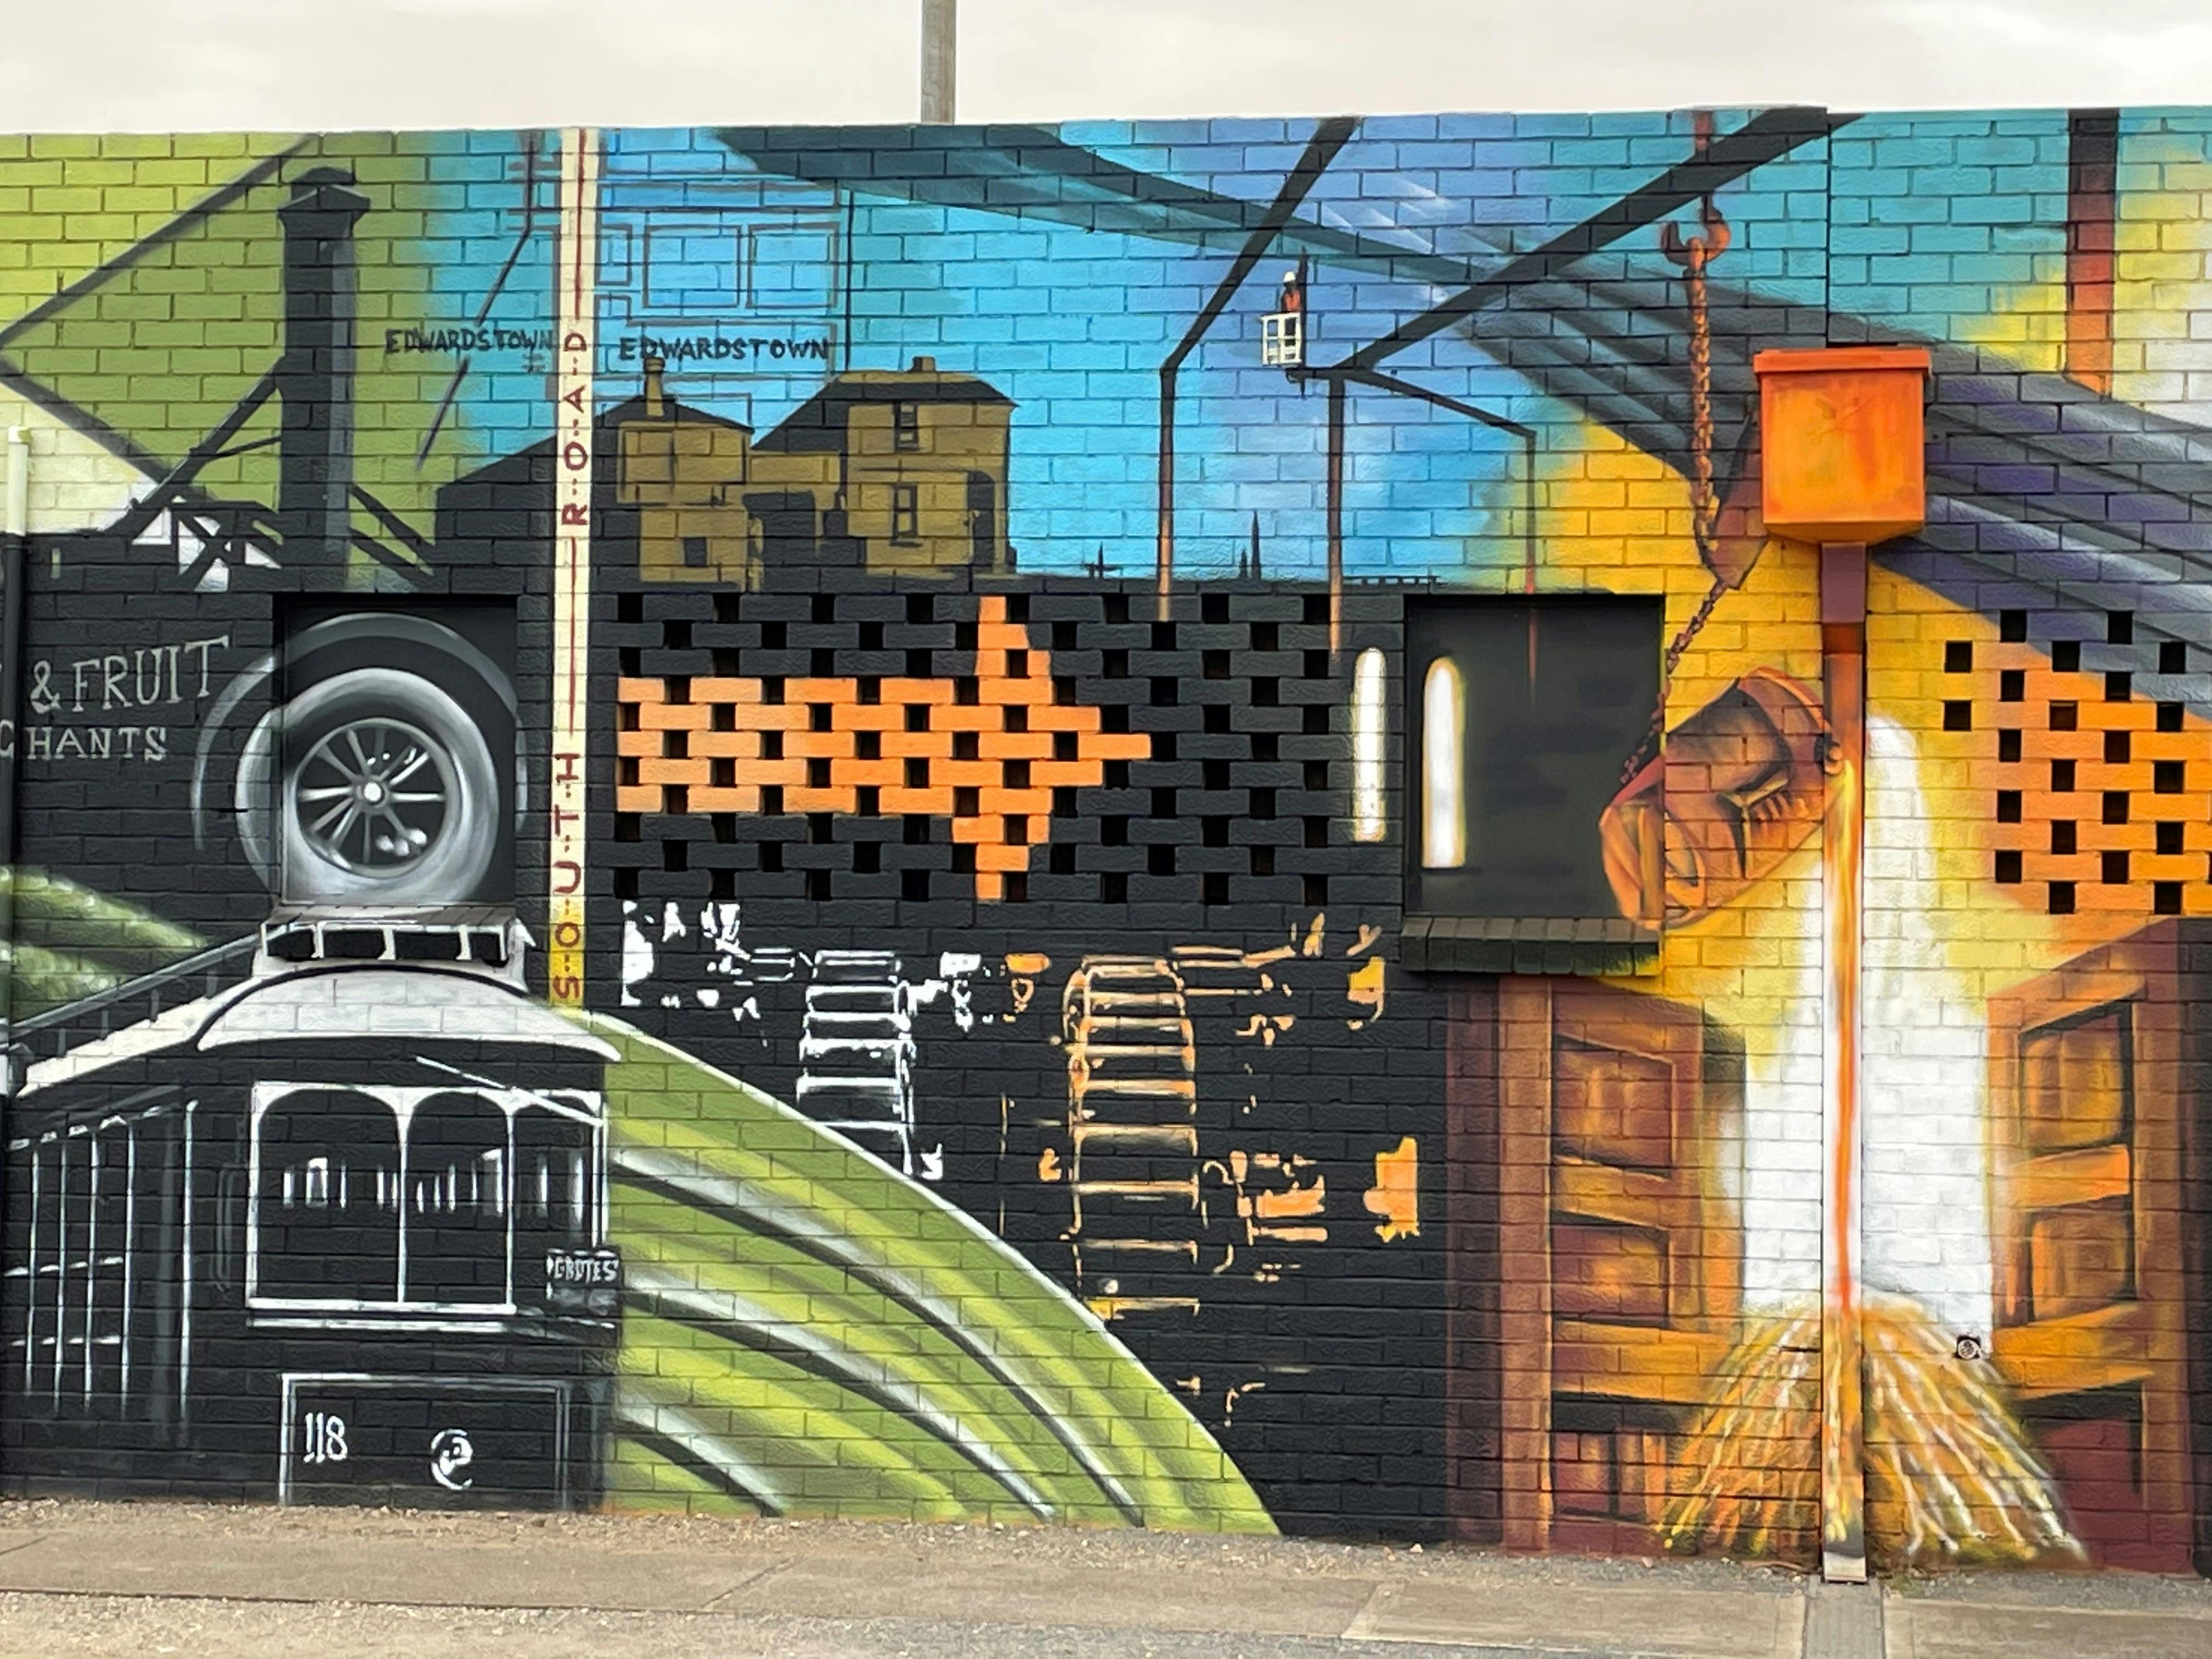 "Industrial Heritage of Edwardstown mural" 2021 by Senman Creations. Commissioned by City of Marion